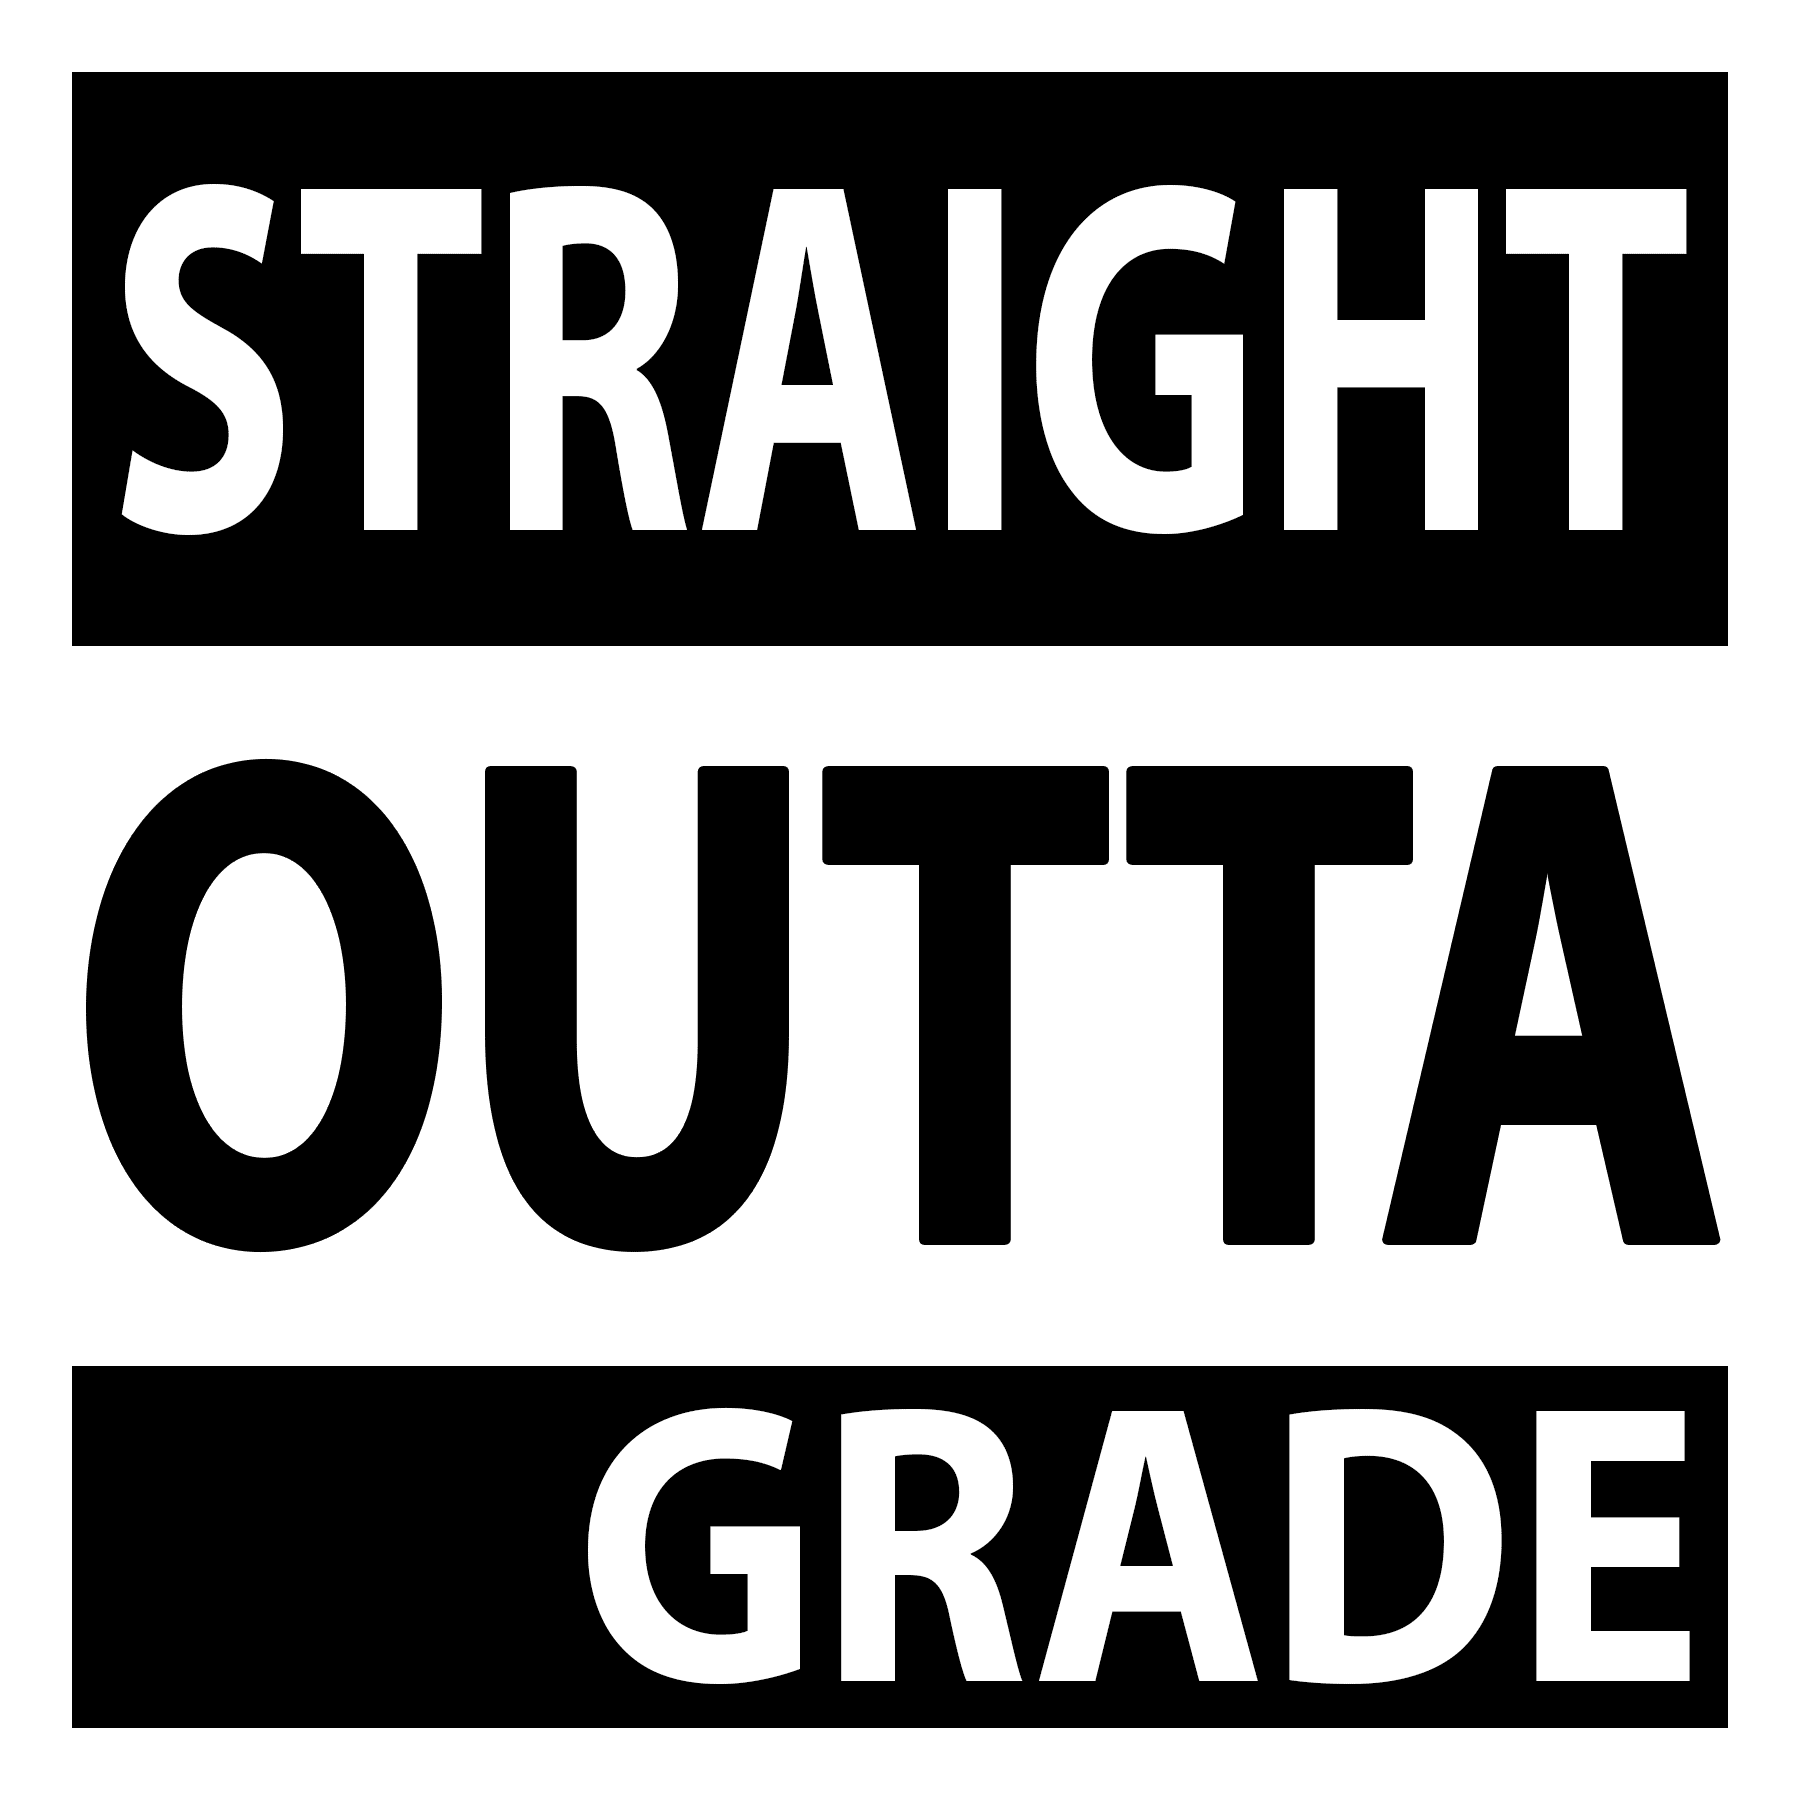 Free Straight Outta SVG Cutting File